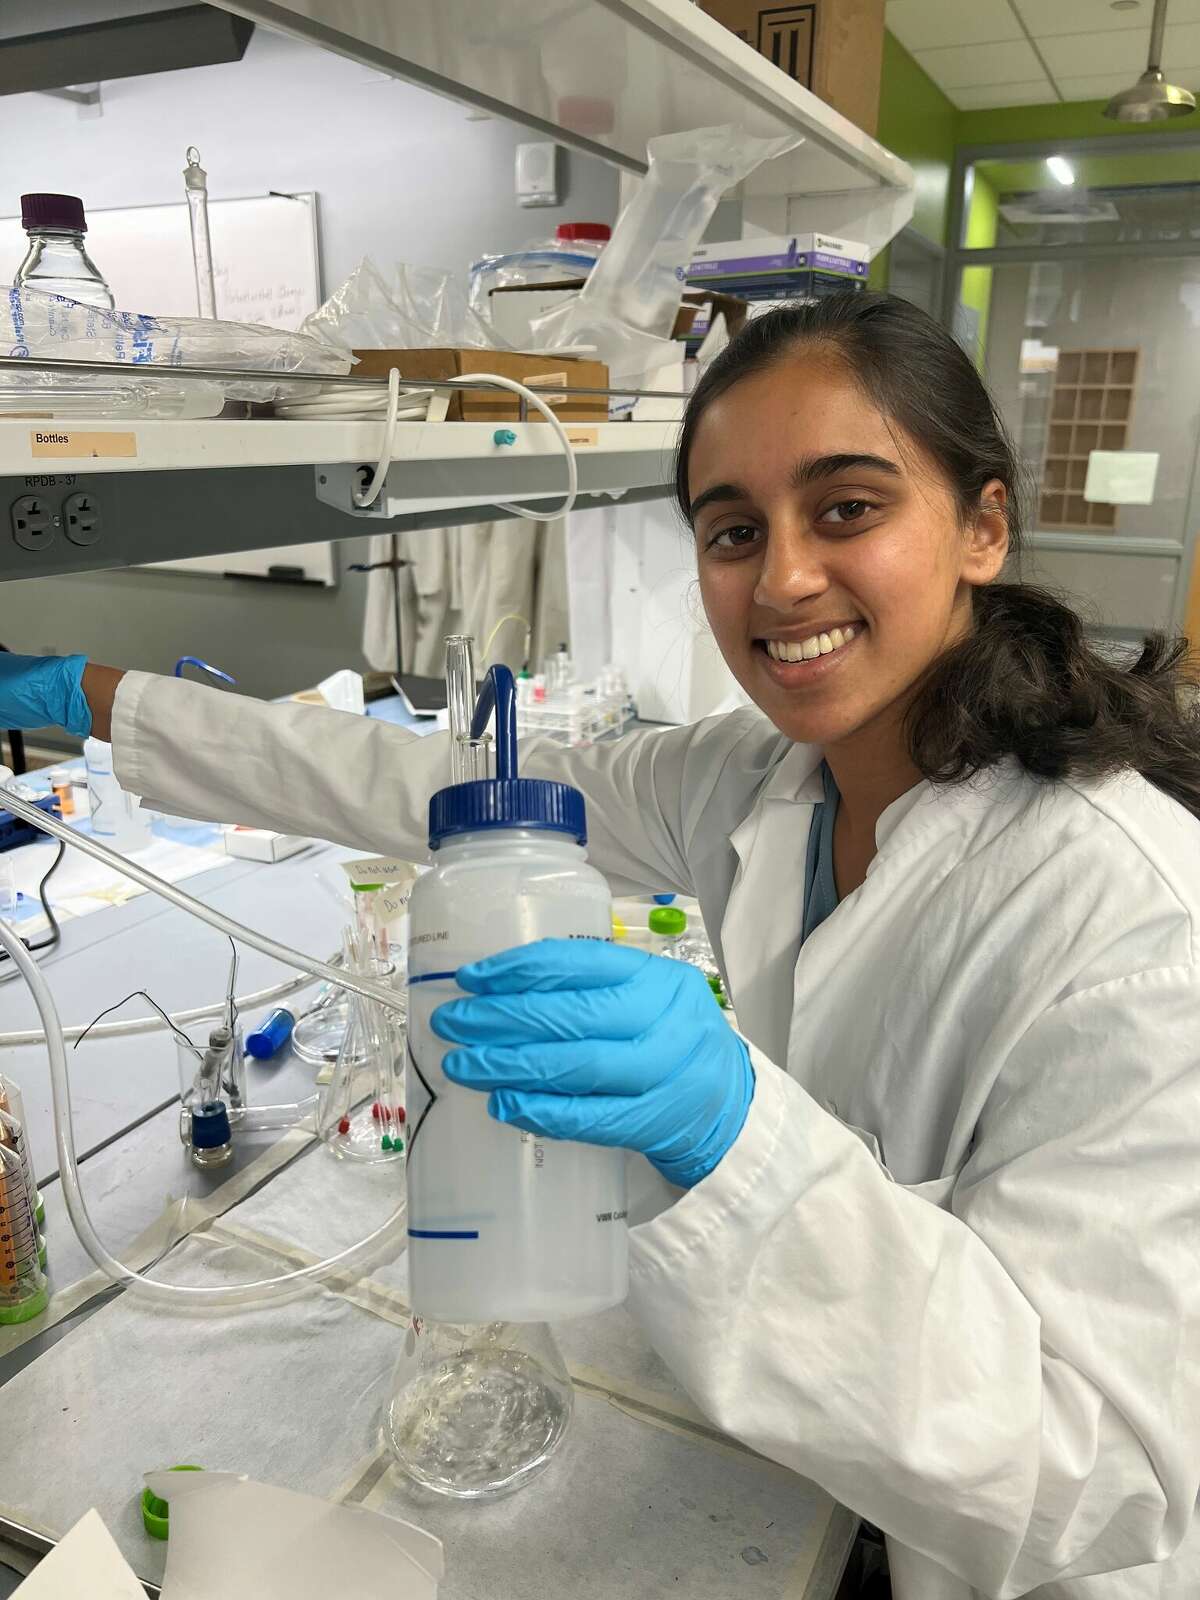 Gouri Krishnan, a Darien resident, was named a Regeneron Science Talent Search(STS) Top Scholar for her research work in King School’s Advanced Science Program forIndependent Research and Engineering 